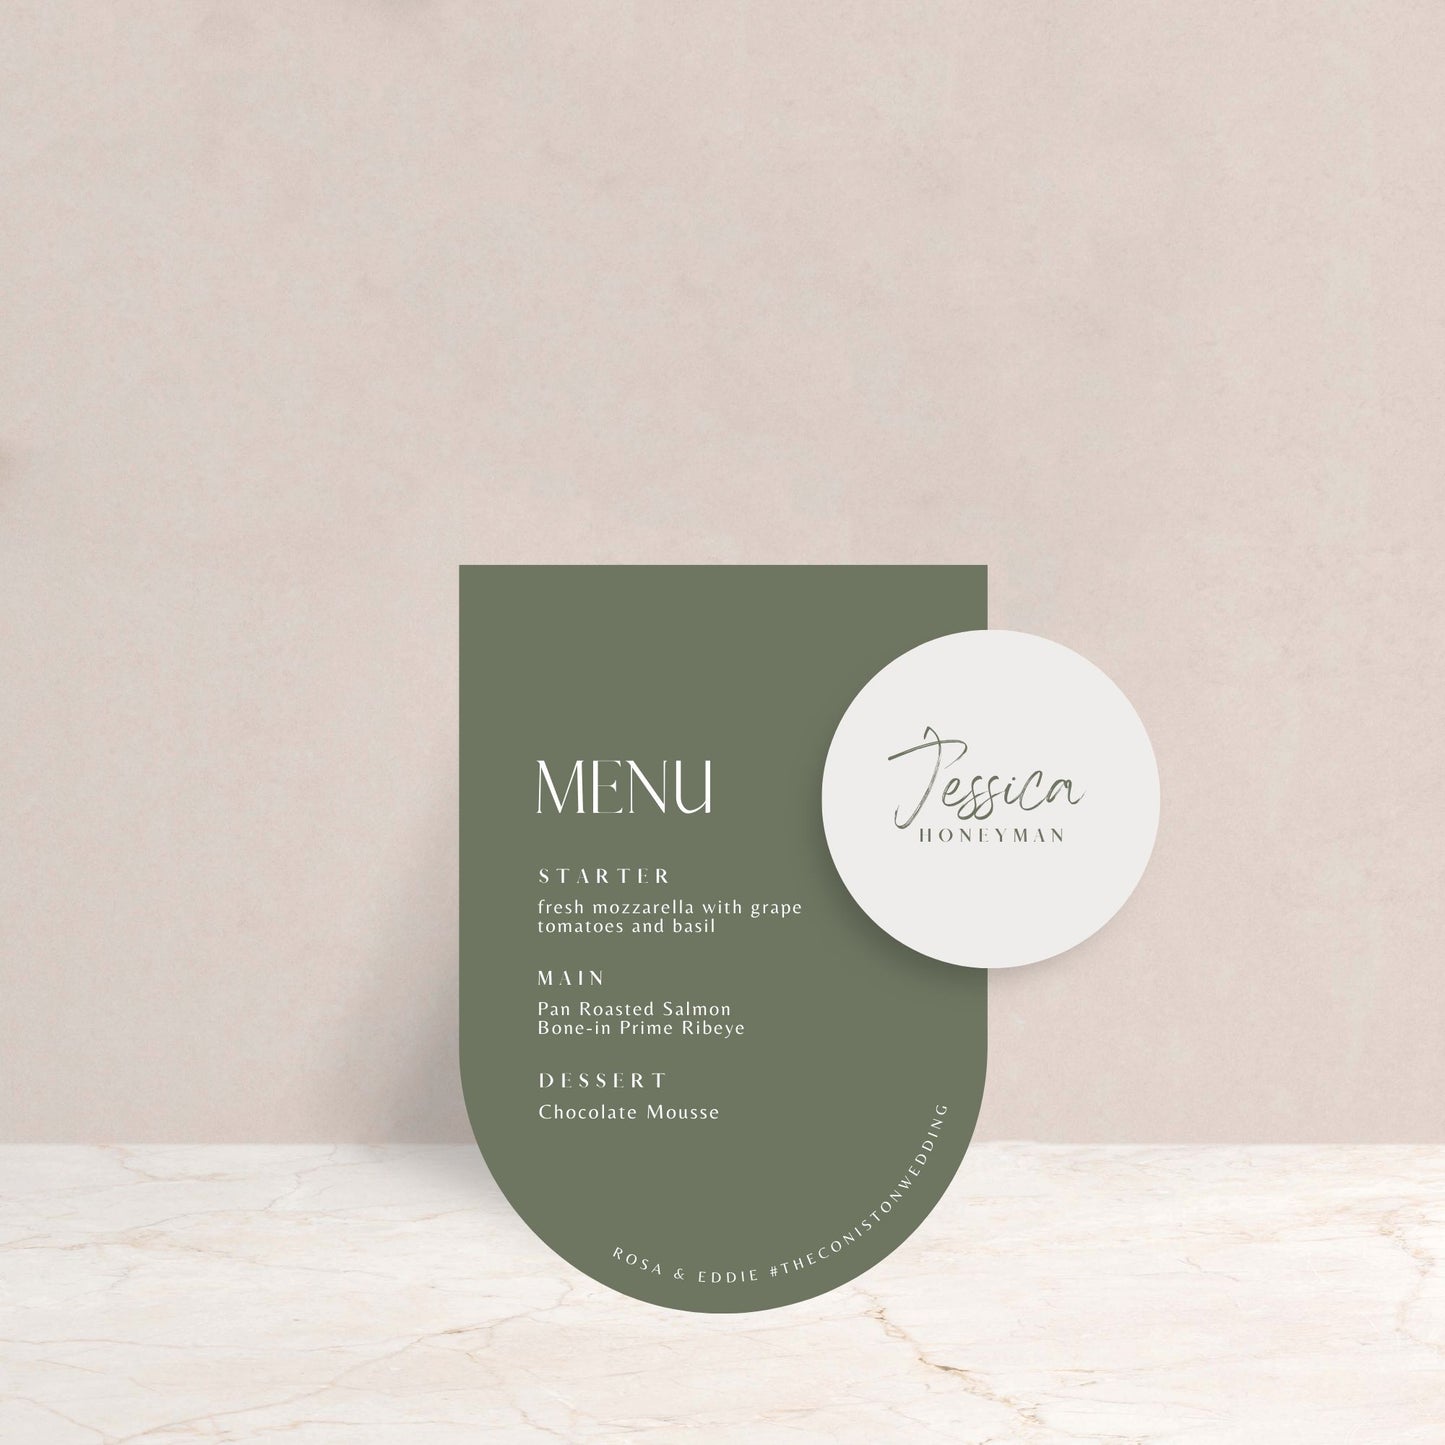 ELOISE Wedding Menu and Place Card Set - Wedding Menu available at The Ivy Collection | Luxury Wedding Stationery